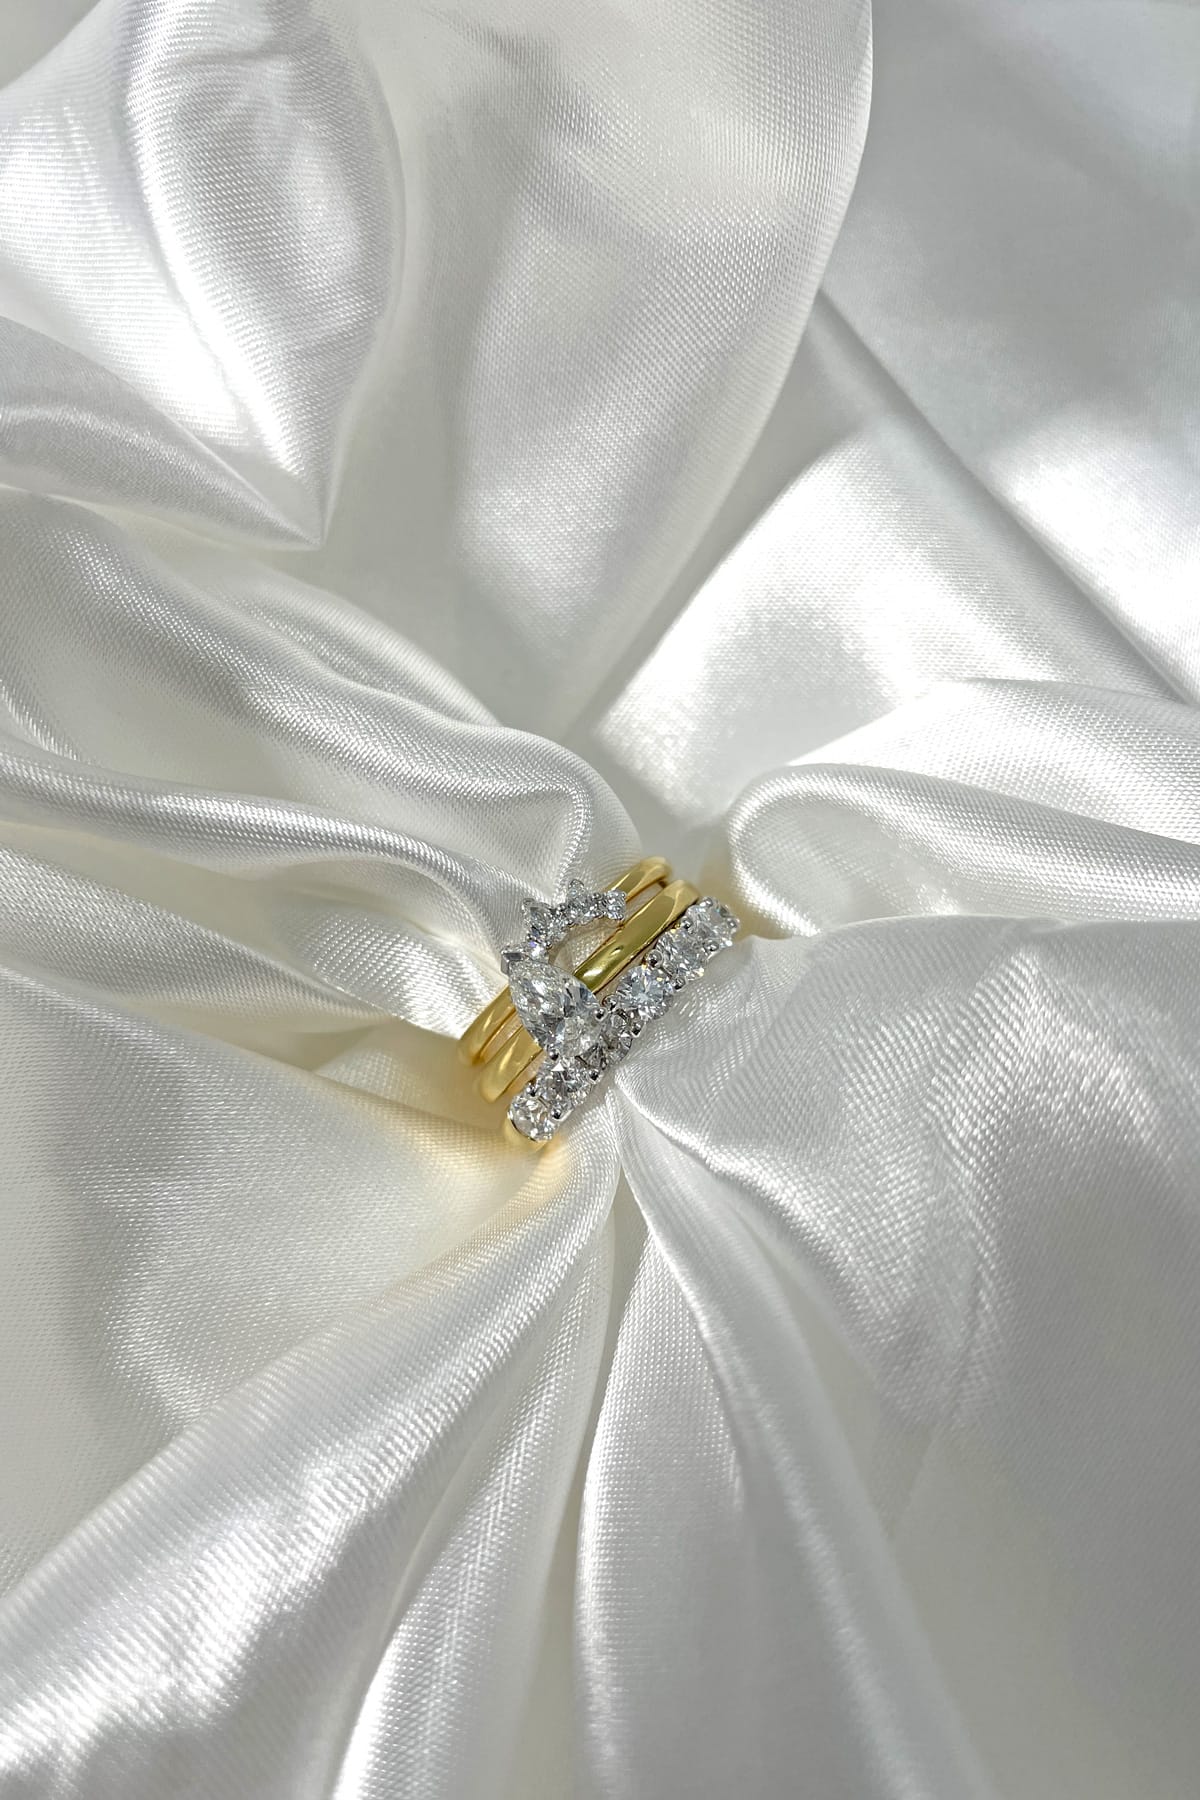 18 Carat Gold With 0.53 Carat Pear Diamond Solitaire Engagement Ring available at LeGassick Diamonds and Jewellery Gold Coast, Australia.